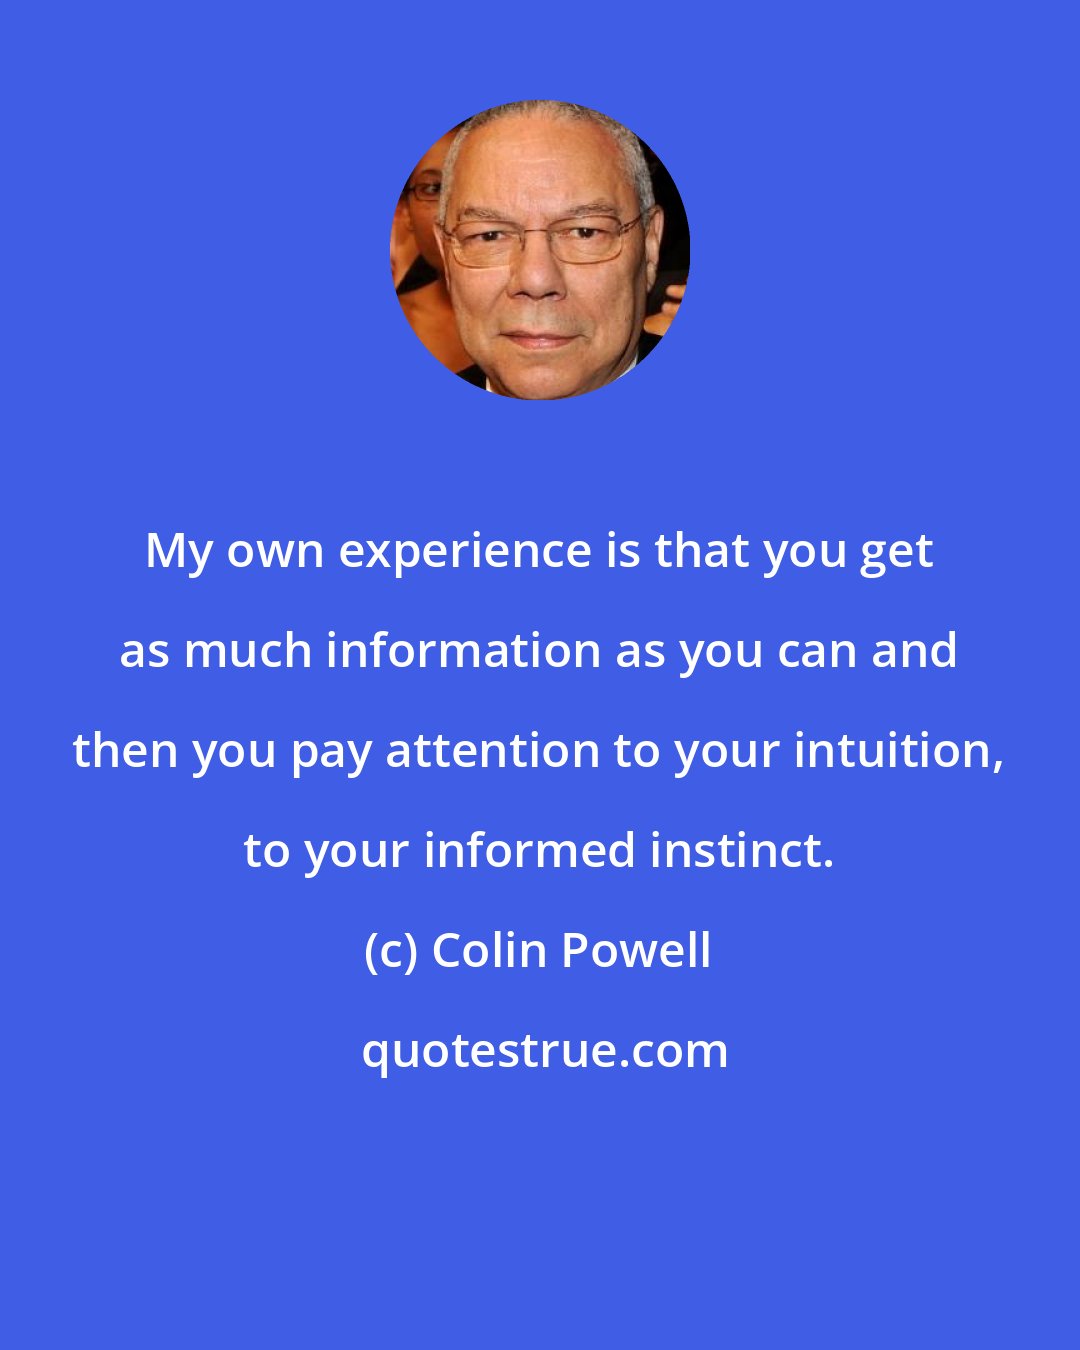 Colin Powell: My own experience is that you get as much information as you can and then you pay attention to your intuition, to your informed instinct.